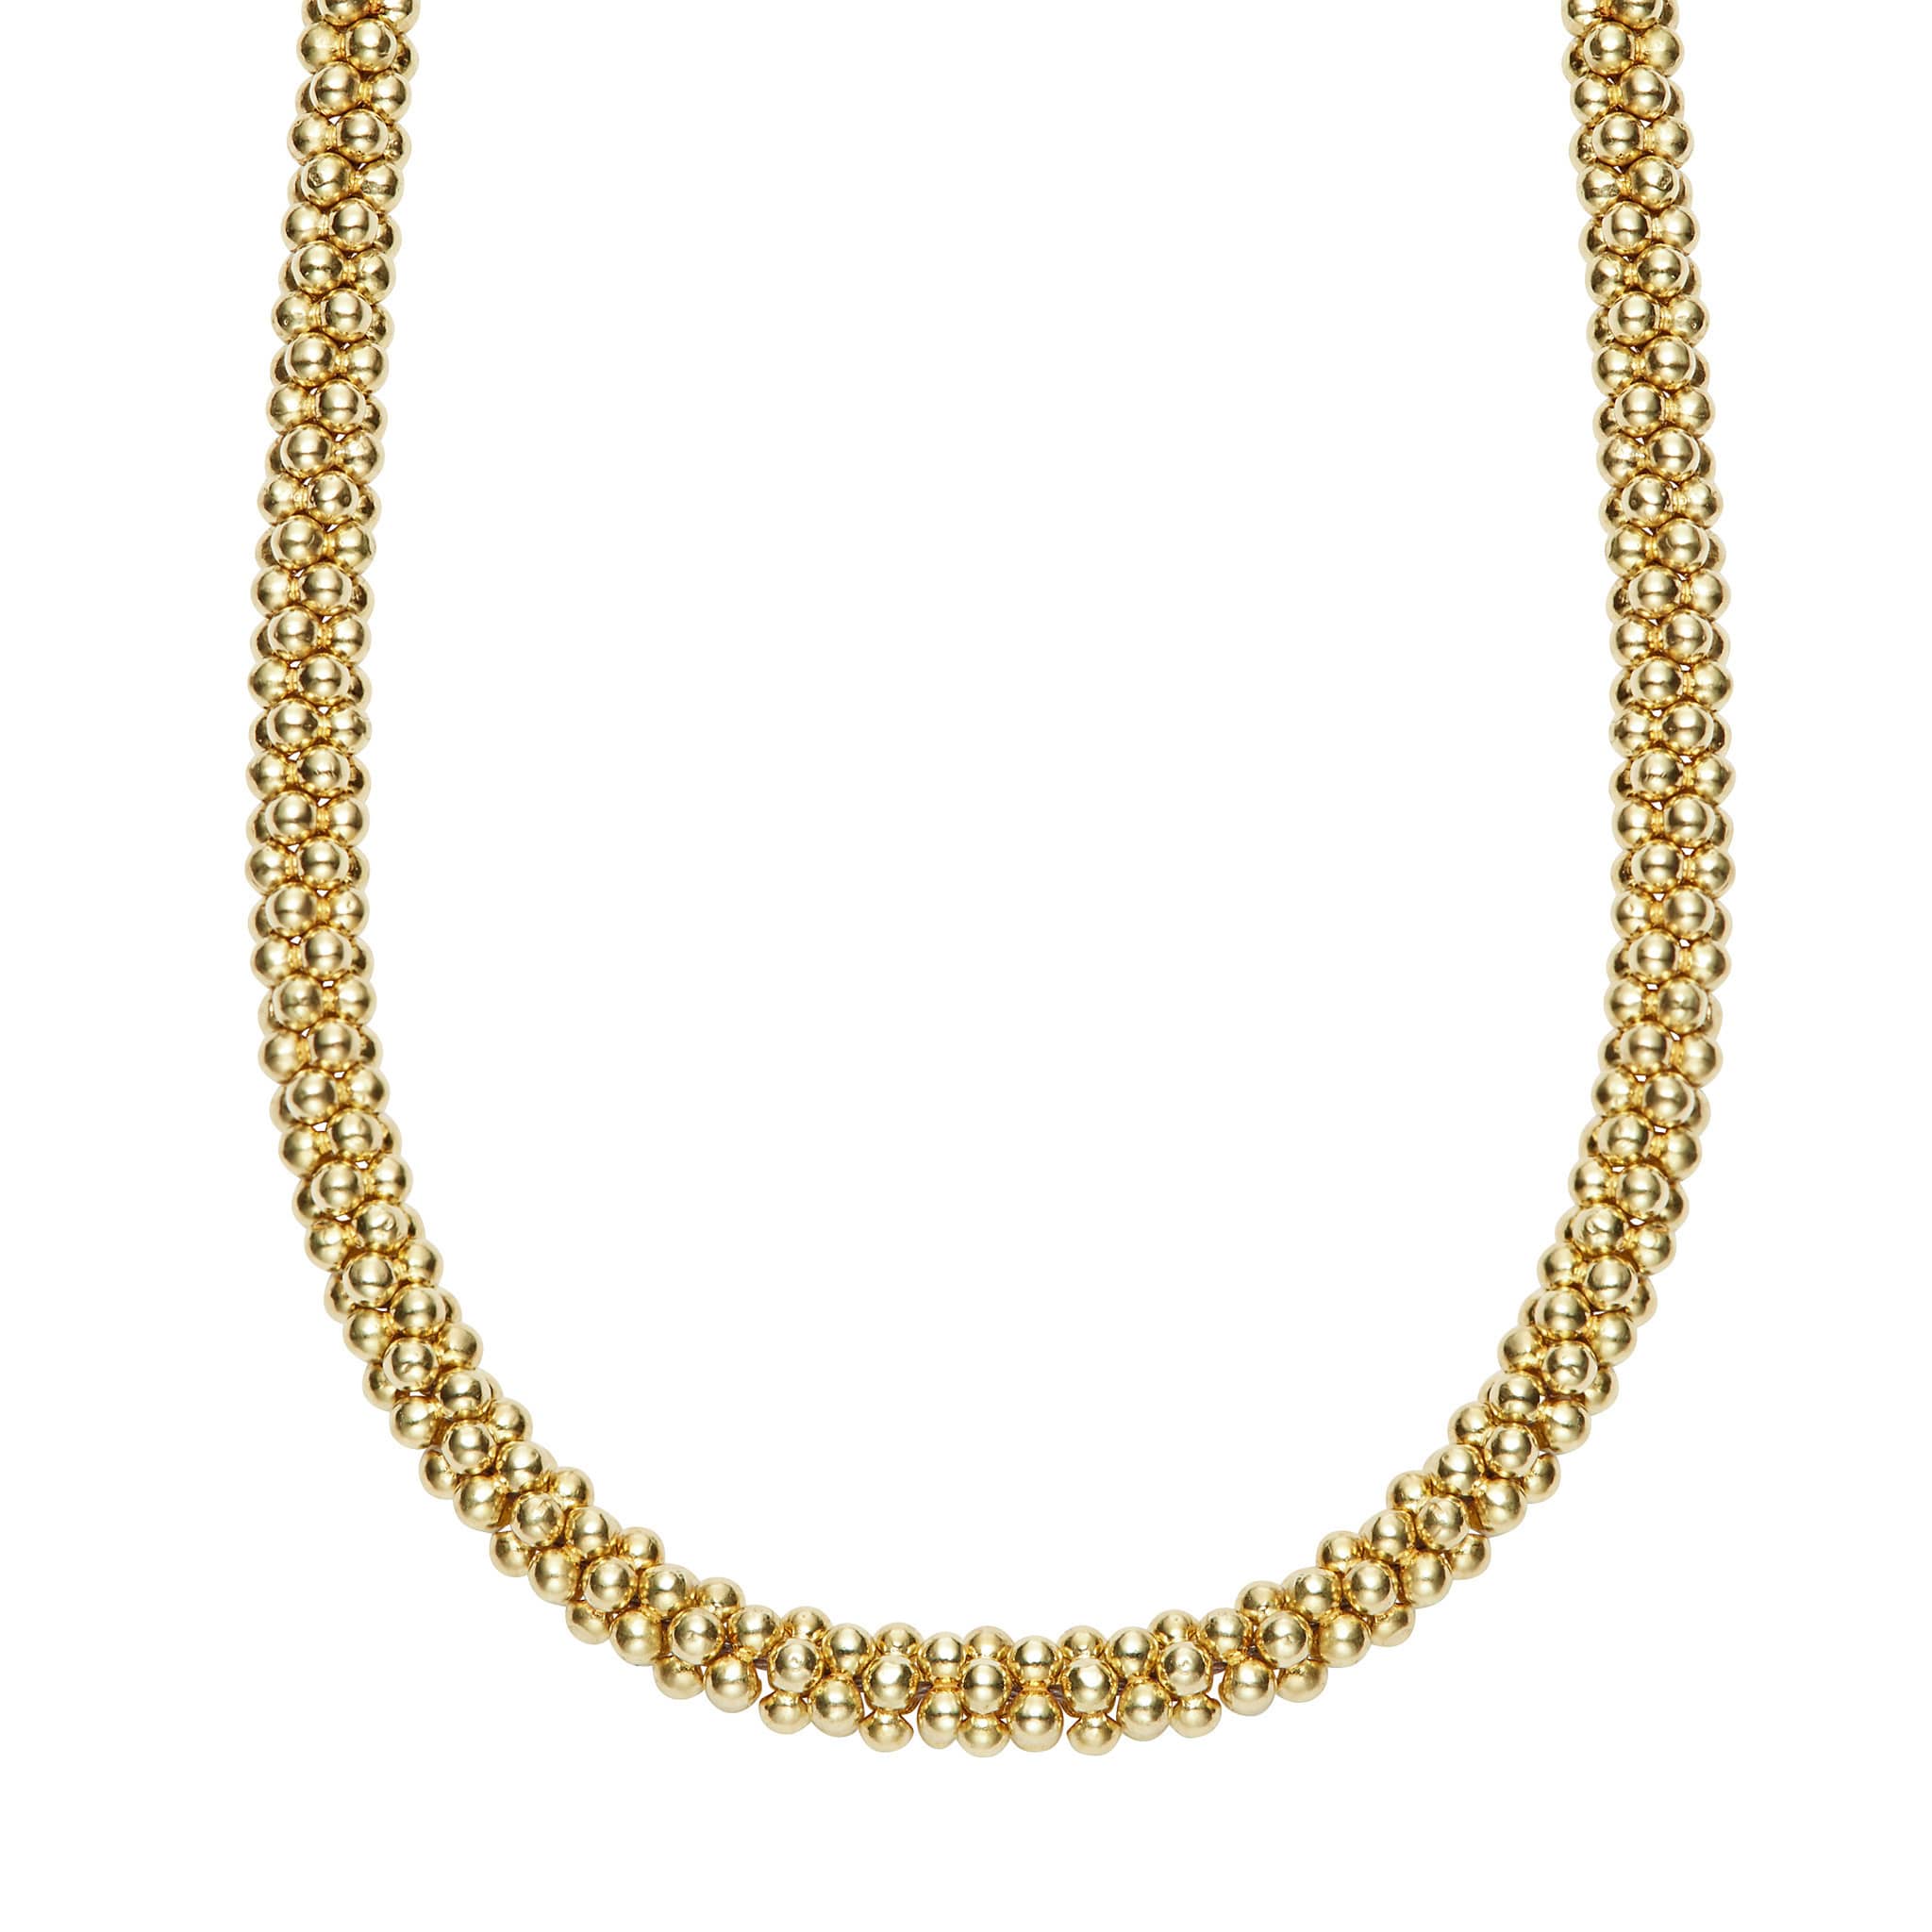 Beaded Gold Necklace - Gold Necklaces